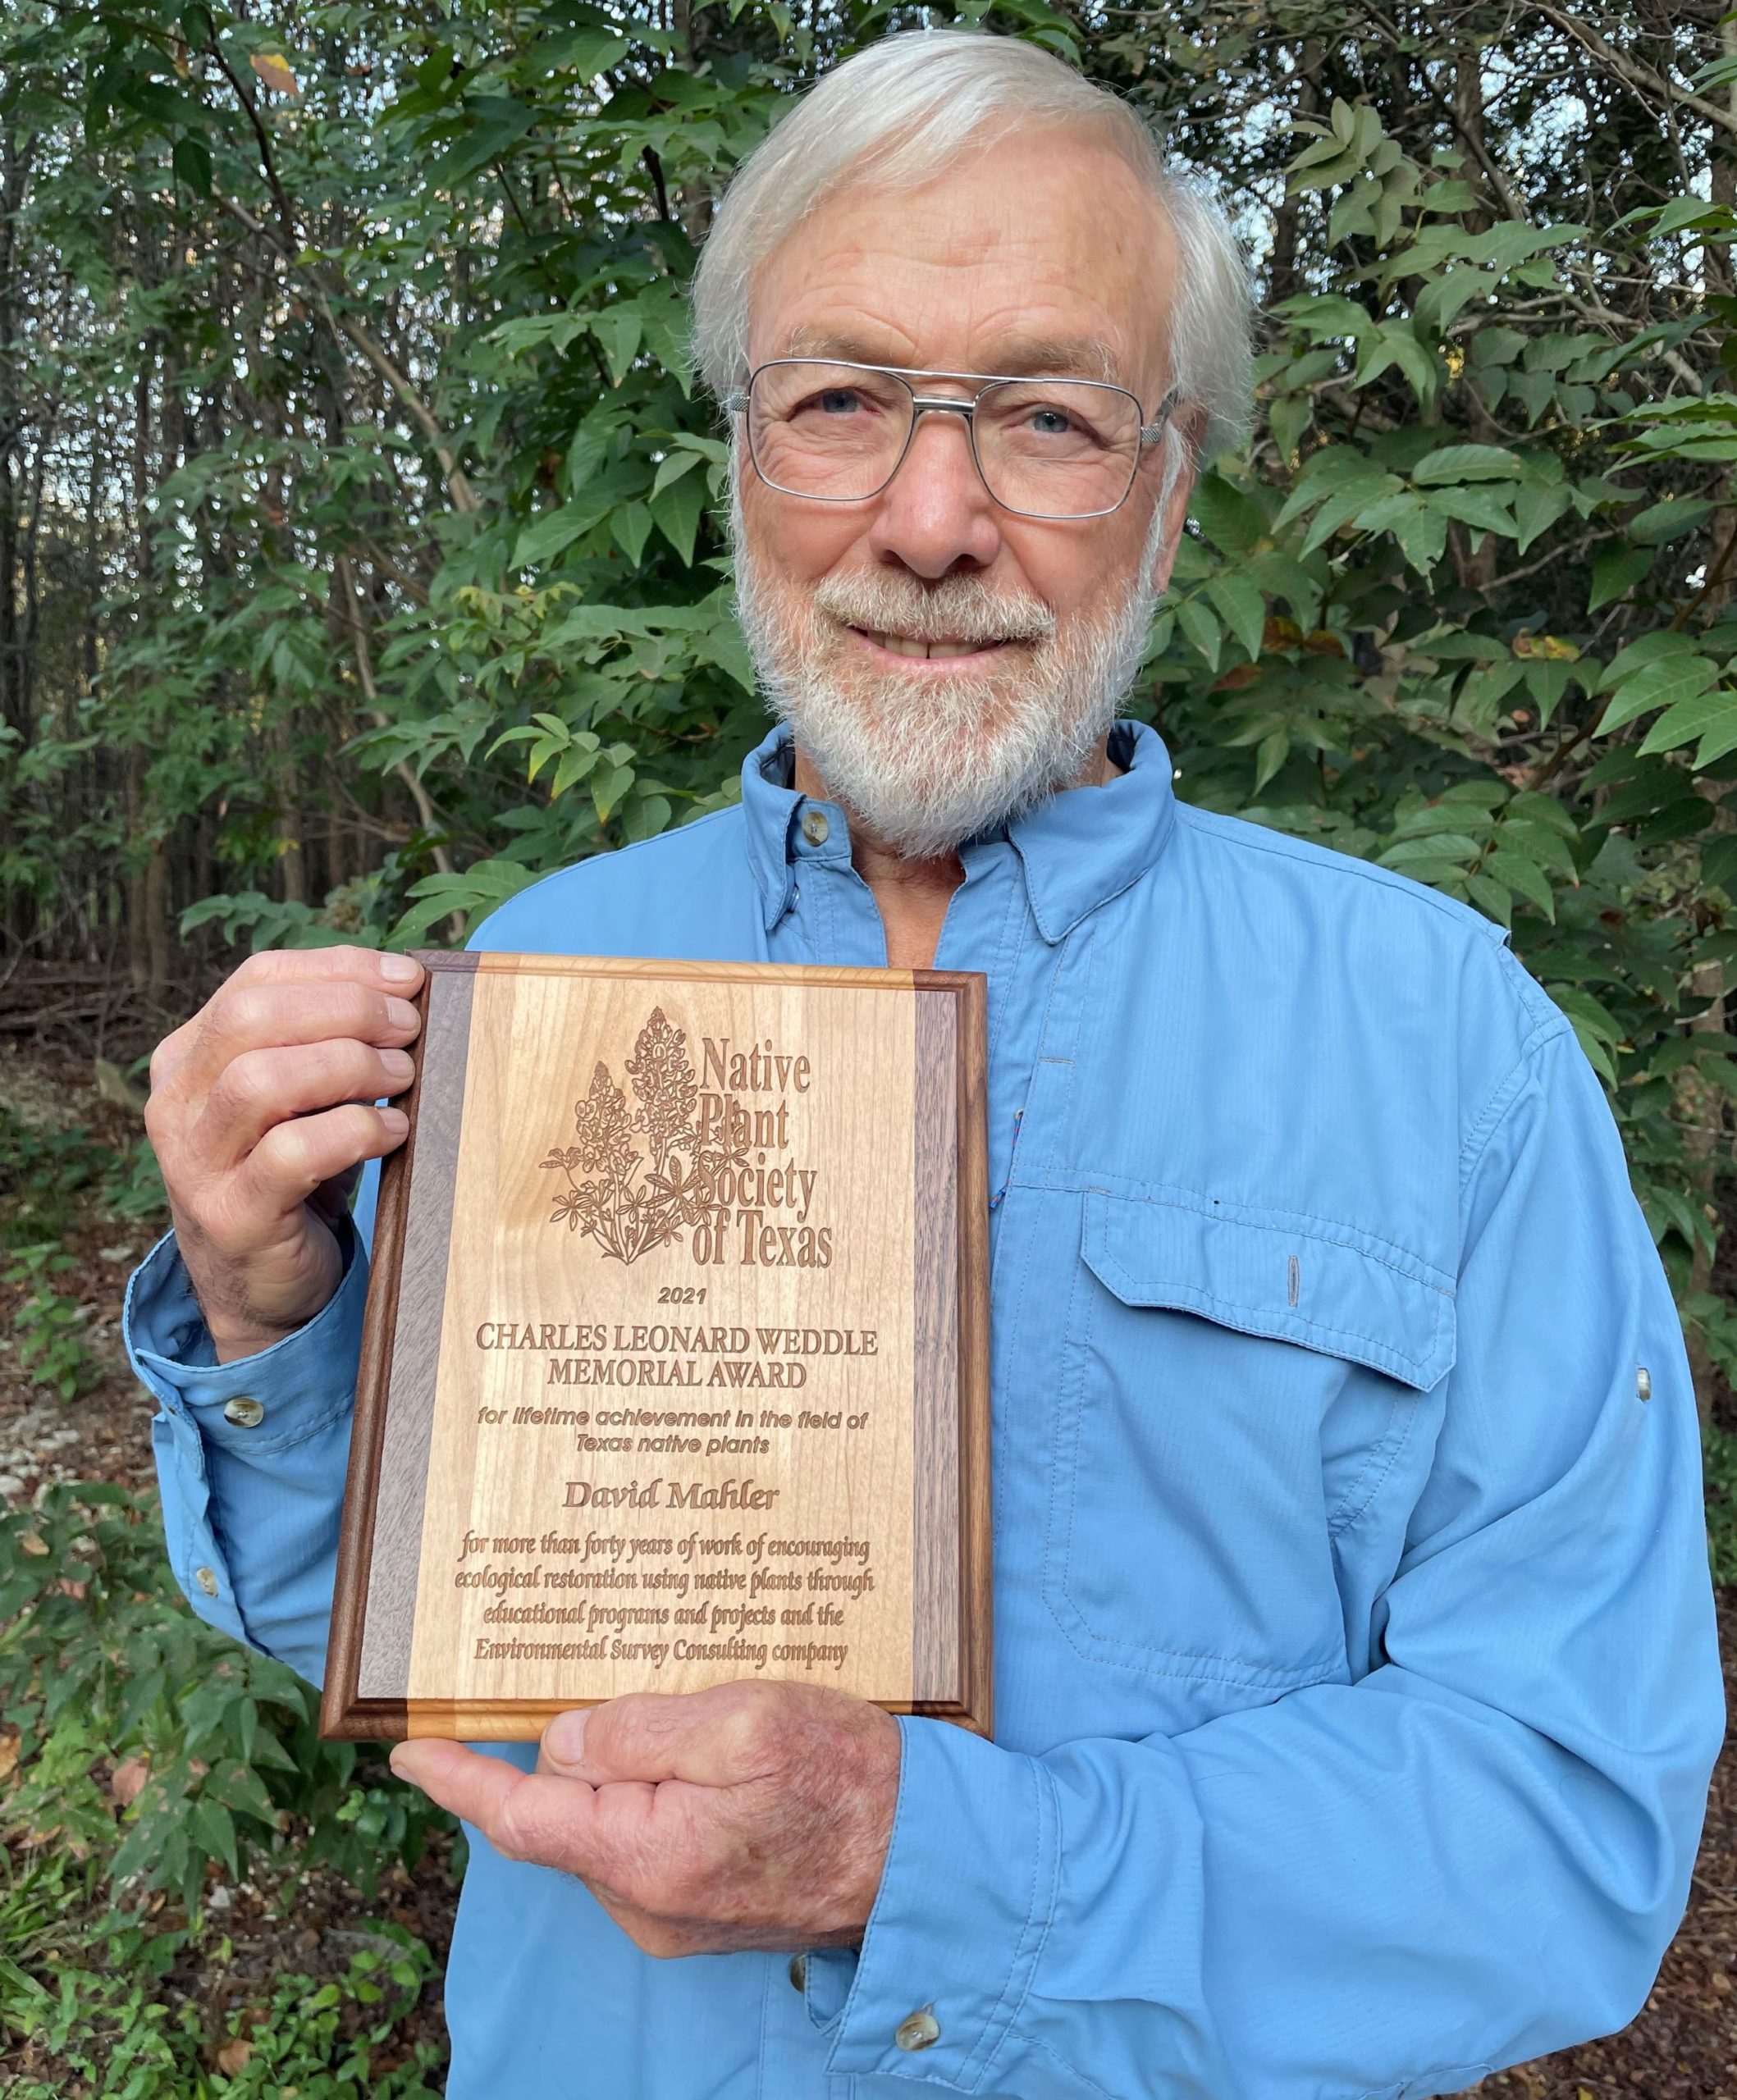 David Mahler standing with NPSOT award in front of native trees and plants